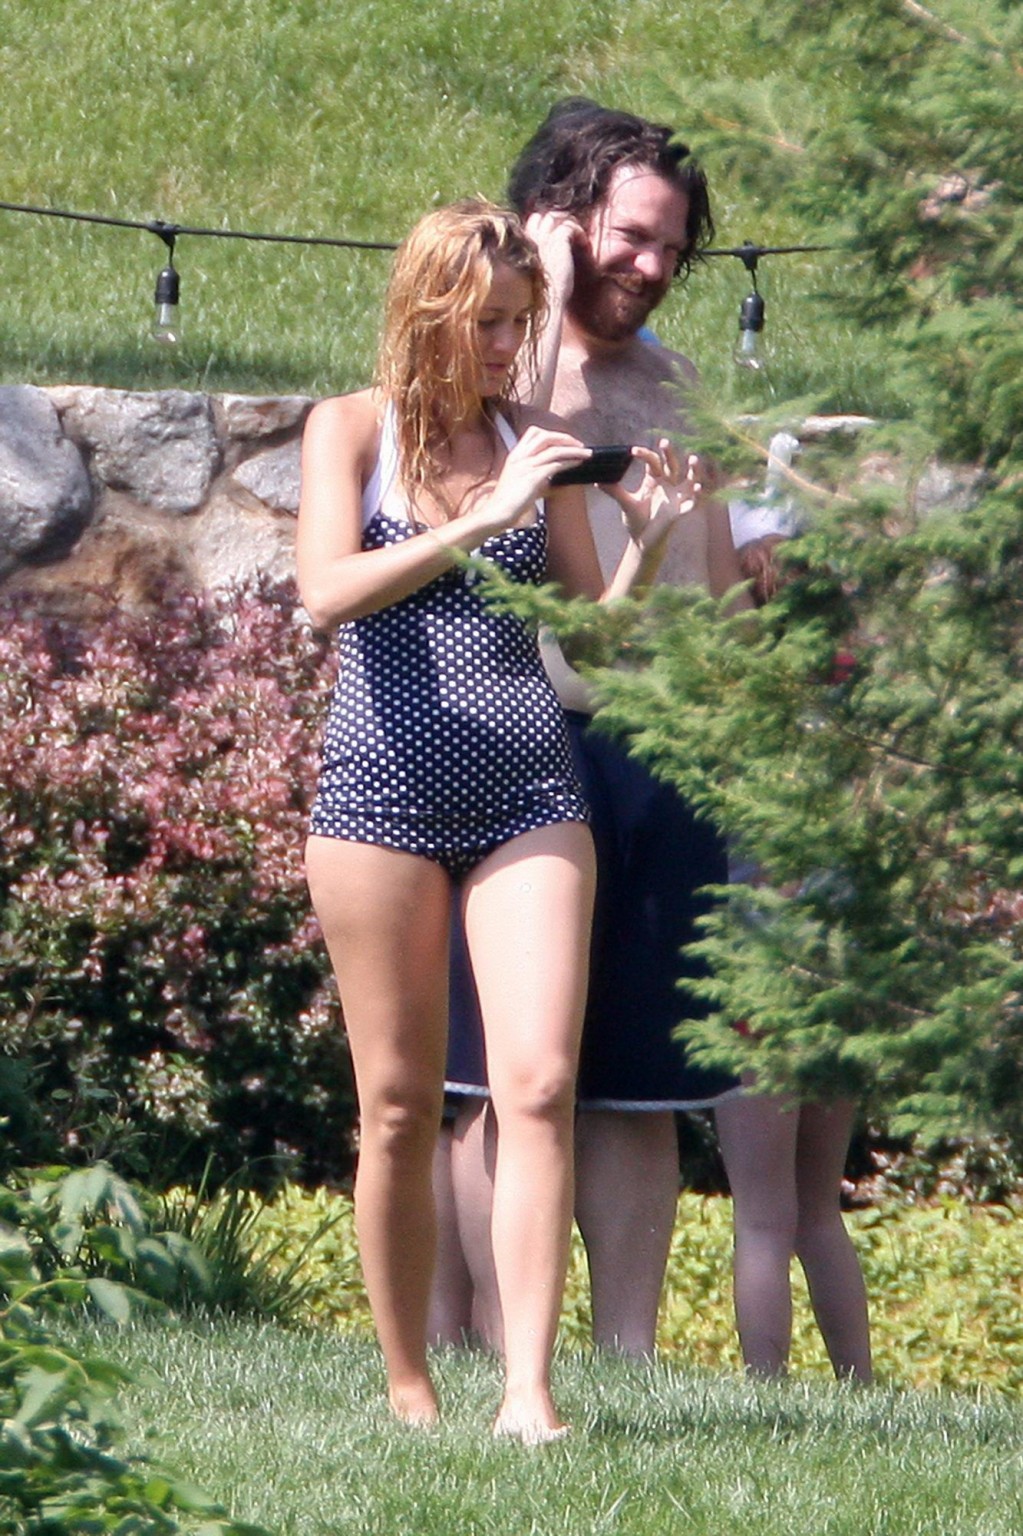 Blake Lively showing her ass in polka dot monokini at the pool party in NYC #75257936